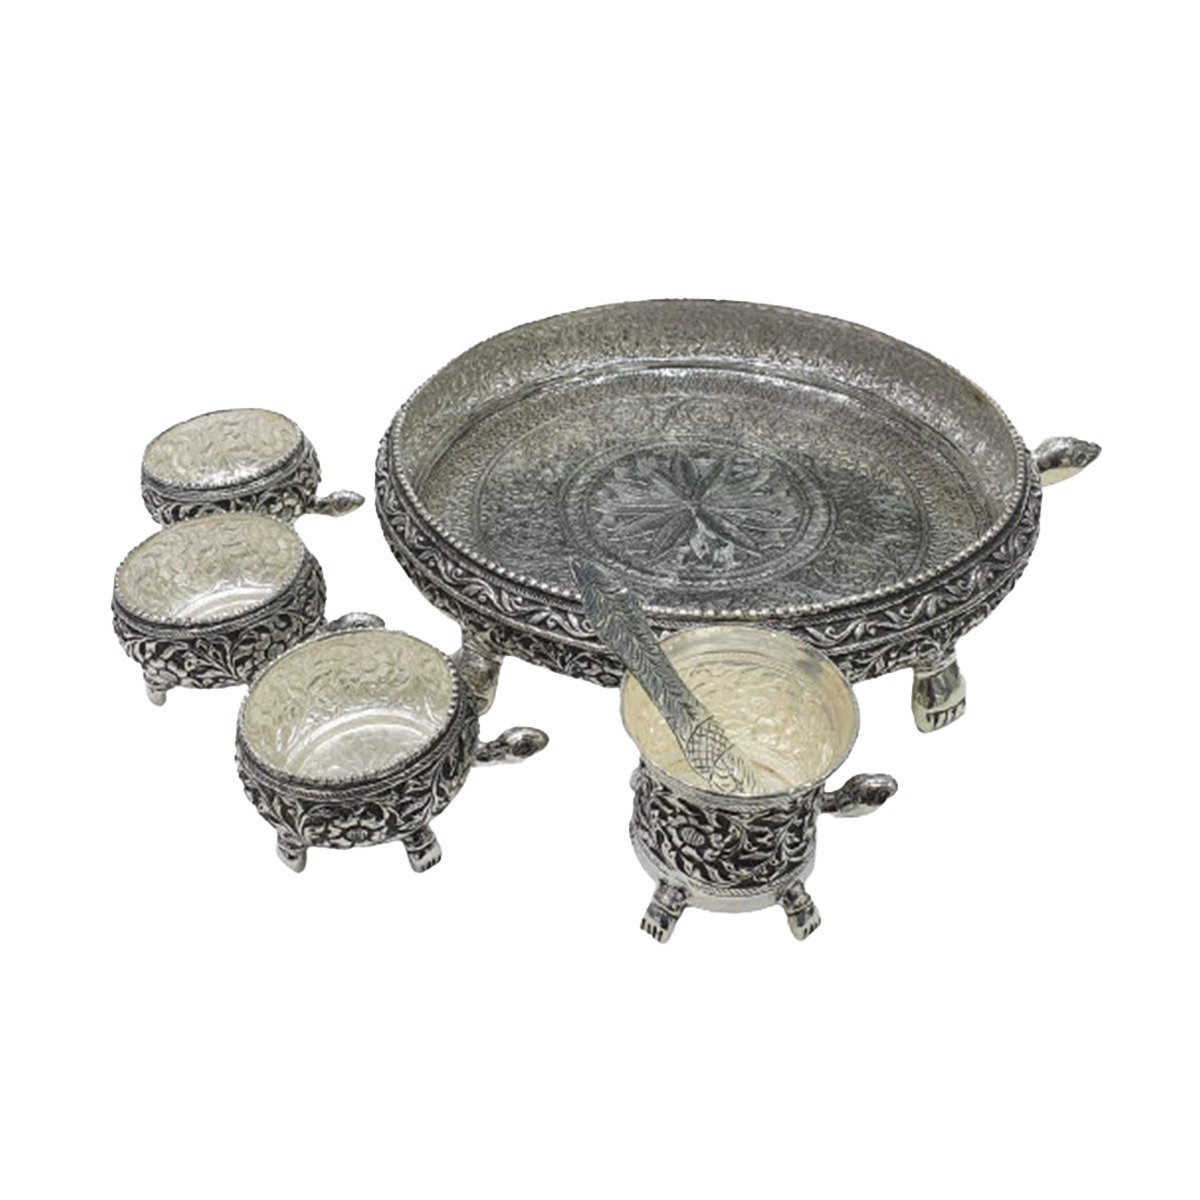 TORTOISE SHAPED TRADITIONAL SILVER POOJA TRAY SET